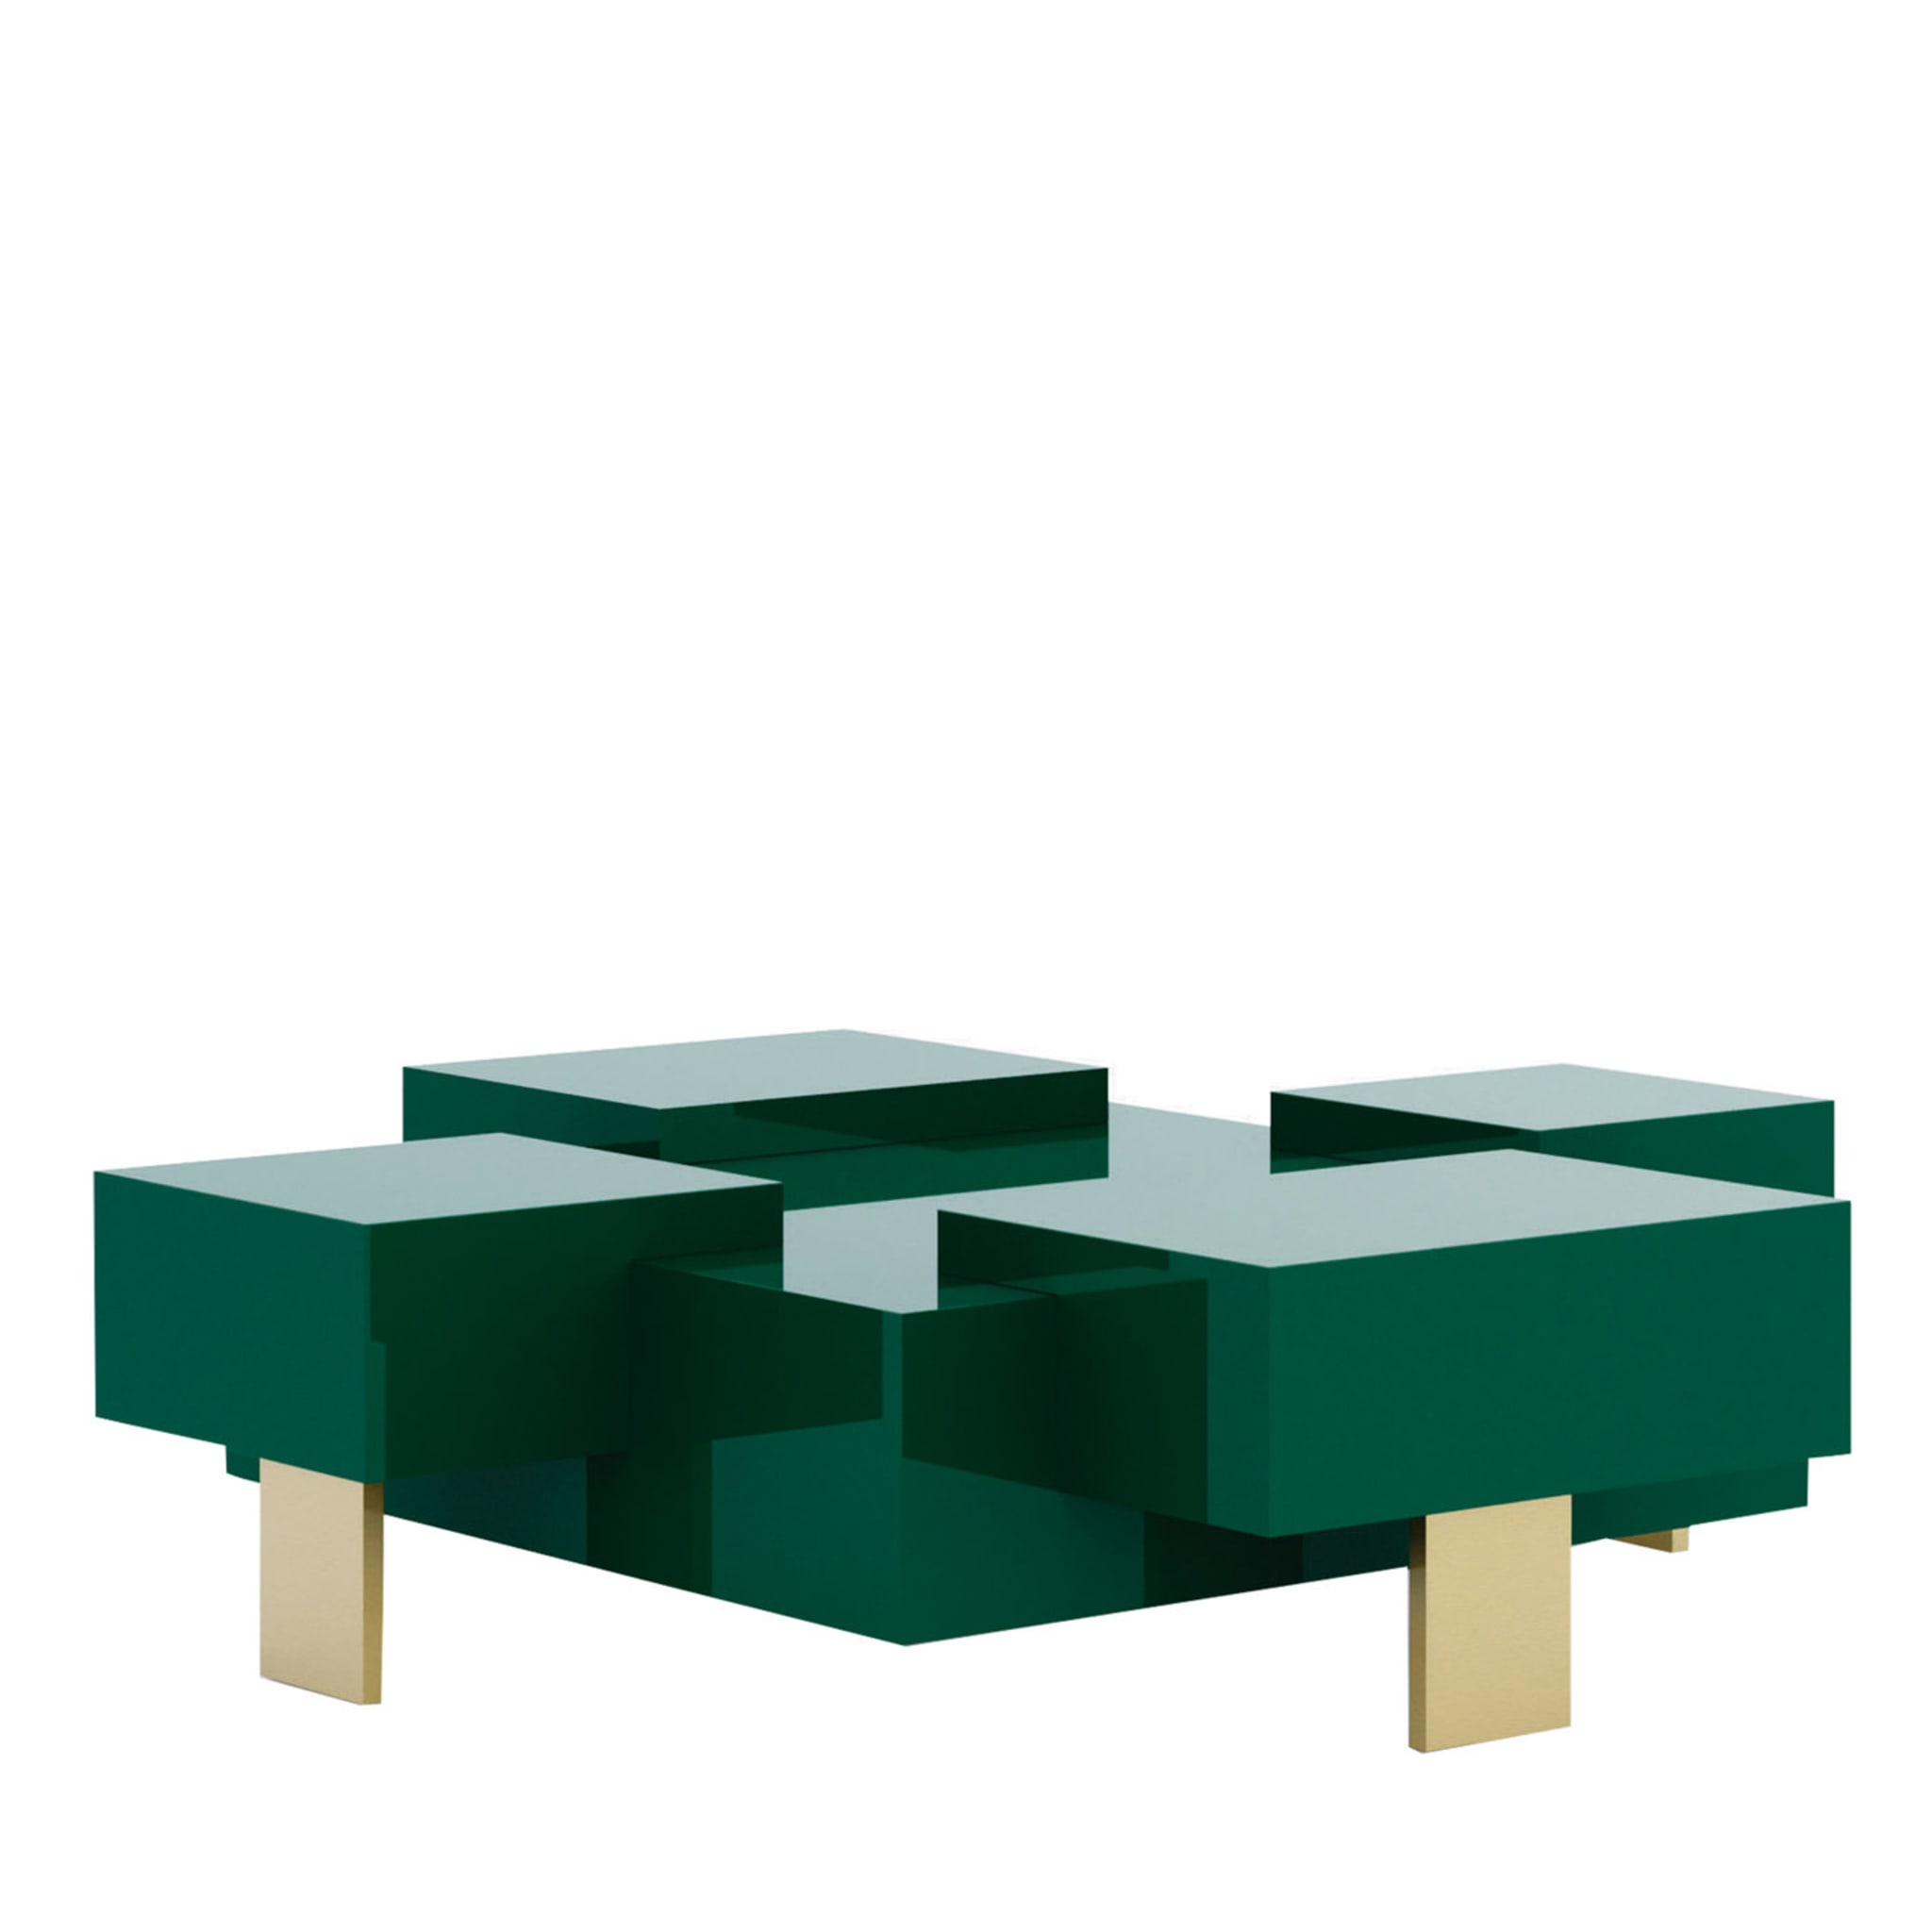 New Mark Coffee Table by Giannella Ventura - Main view